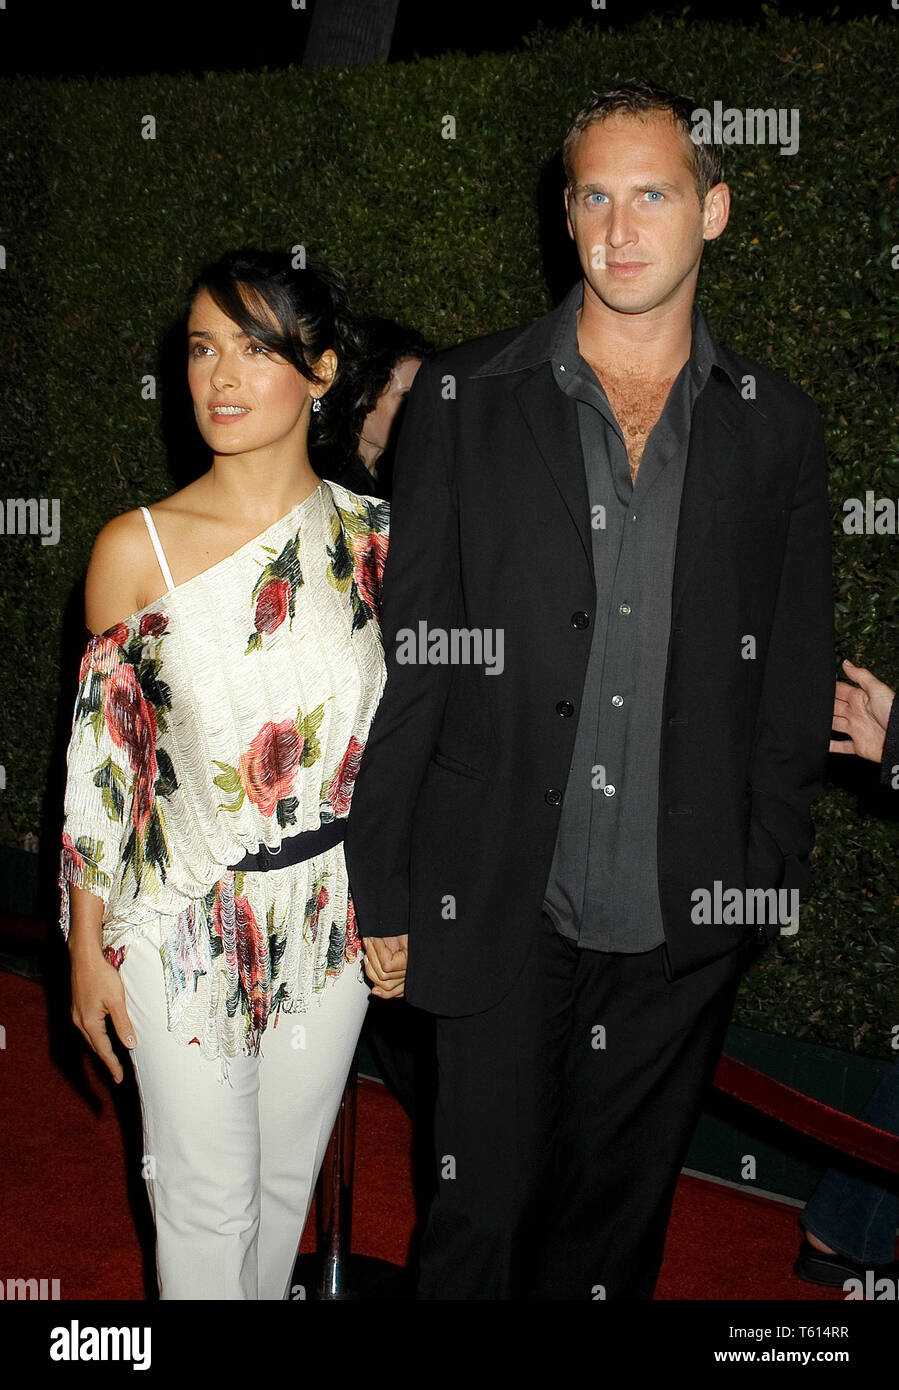 Salma Hayek & Josh Lucas at the The Premiere Screening of Salma Hayek's Directorial Debut of 'The Maldonado Miracle' at the Academy of Motion Picture Arts & Sciences Samuel Goldwyn Theater in  Beverly Hills, CA. The event took place on Thursday, October 2, 2003. Photo by: SBM / PictureLux  File Reference # 33790 1492SBMPLX Stock Photo